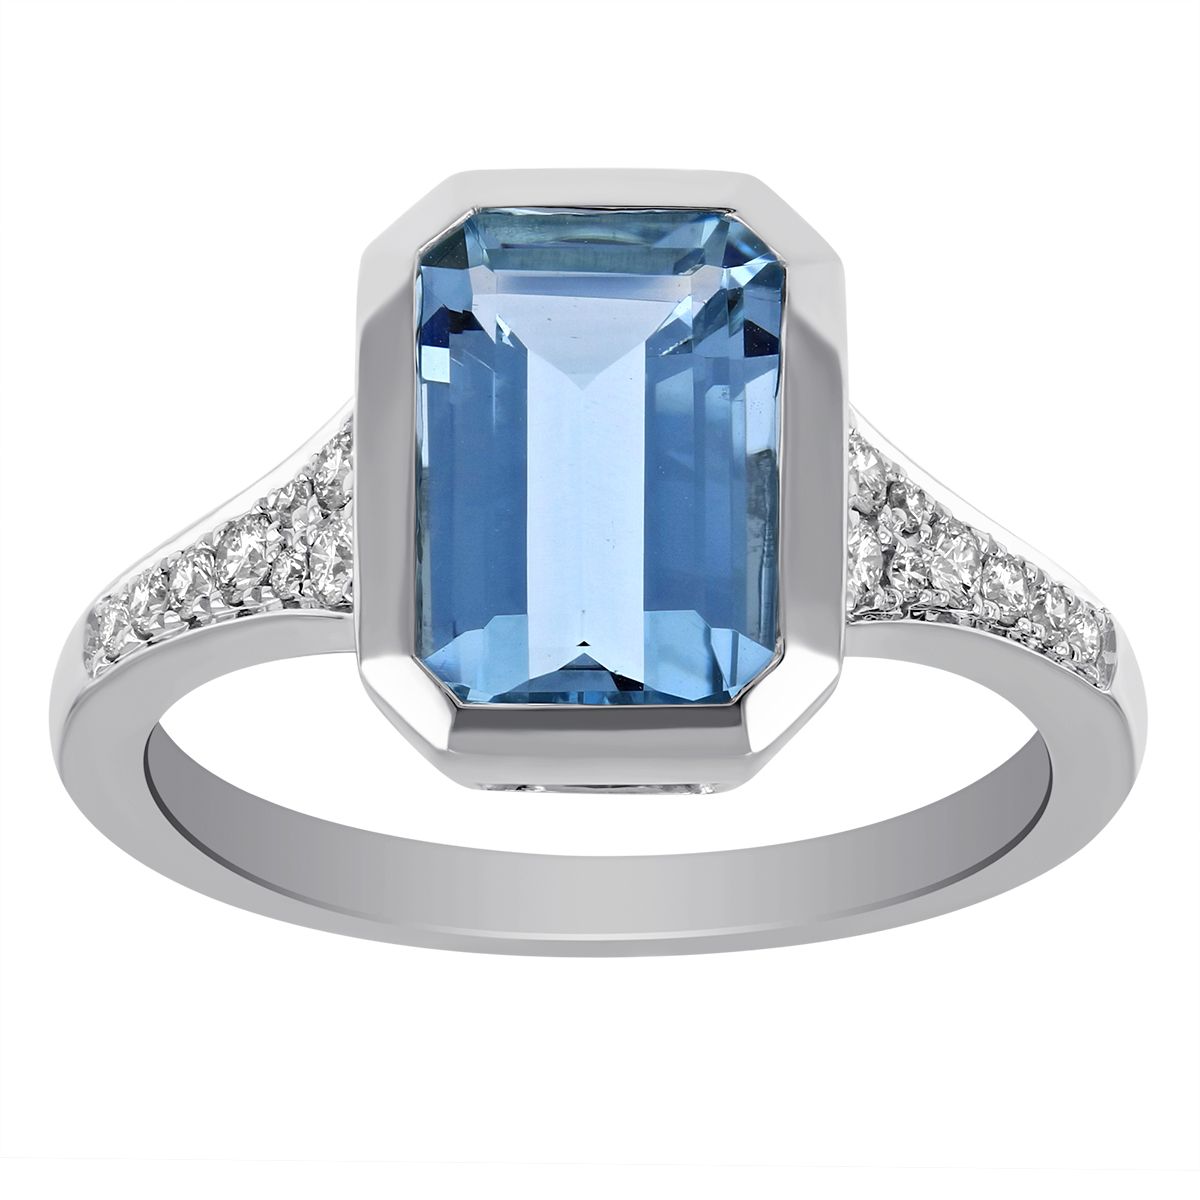 Emerald Cut Aquamarine Ring with Tapered Diamond Shank in White Gold